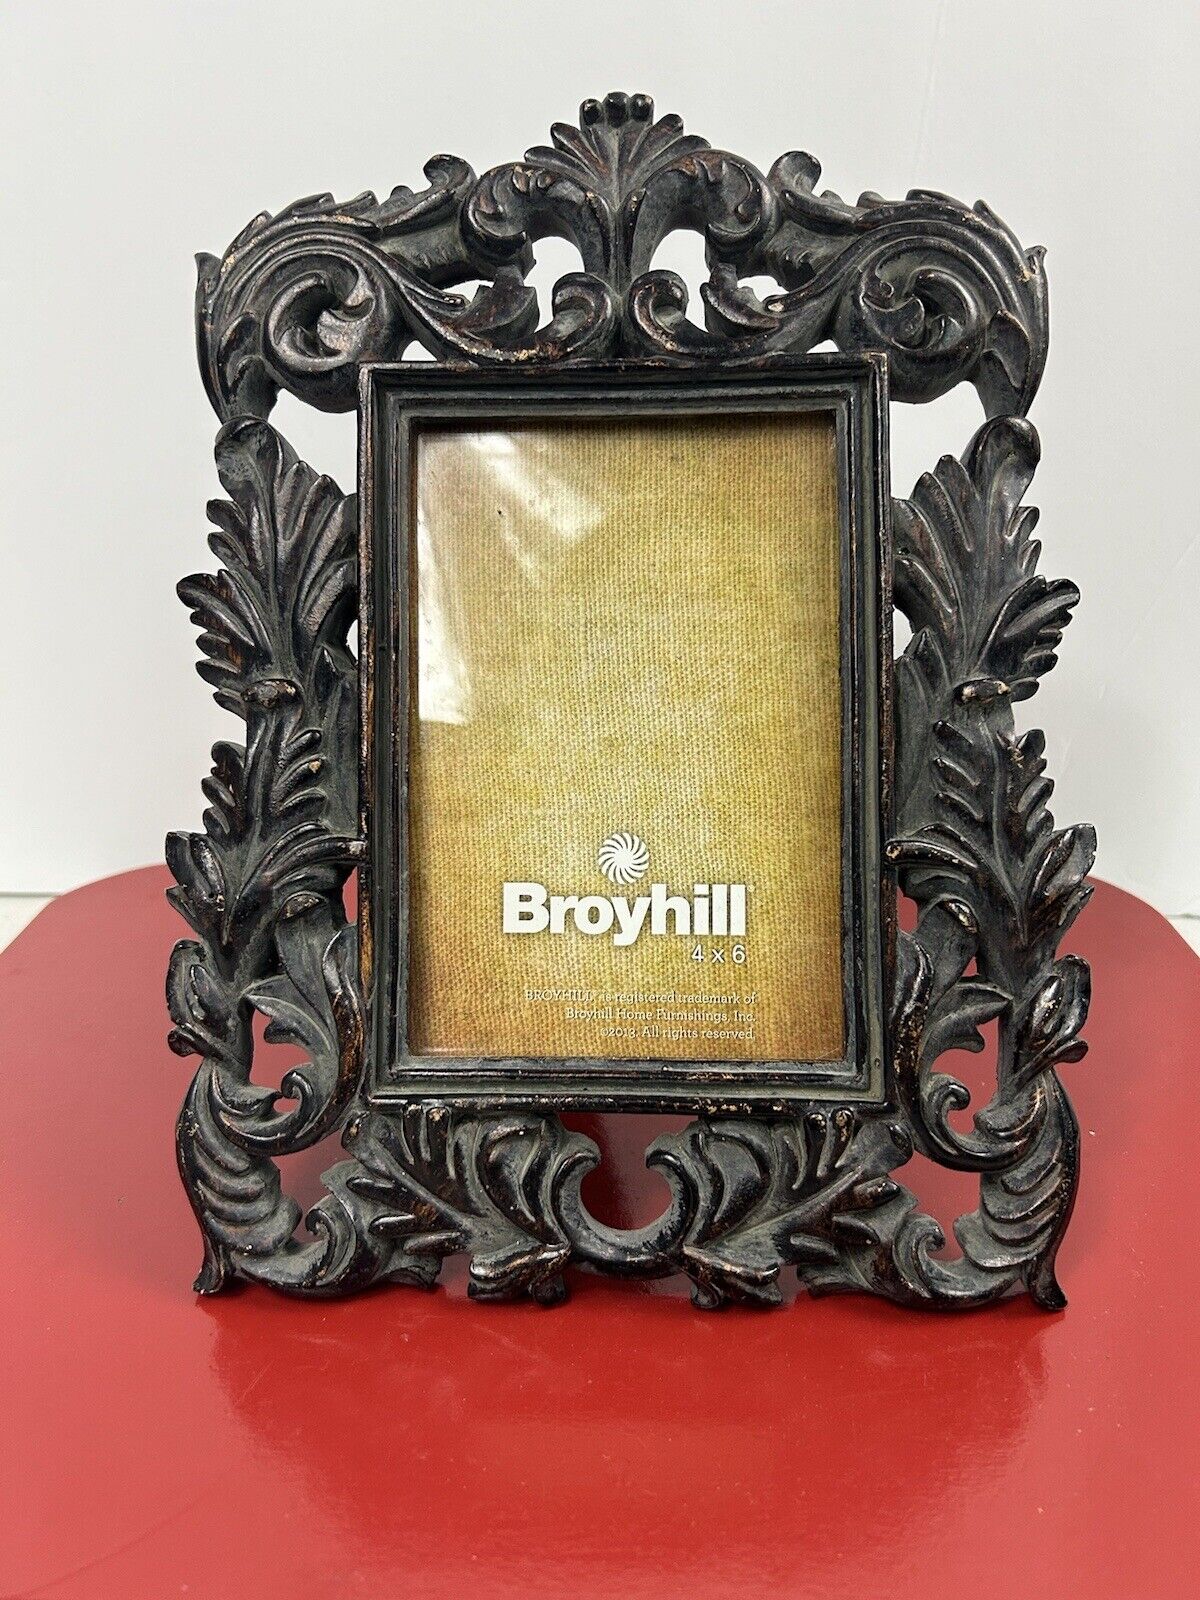 Broyhill Ornate Photo Picture Frame Antique For 4x6\